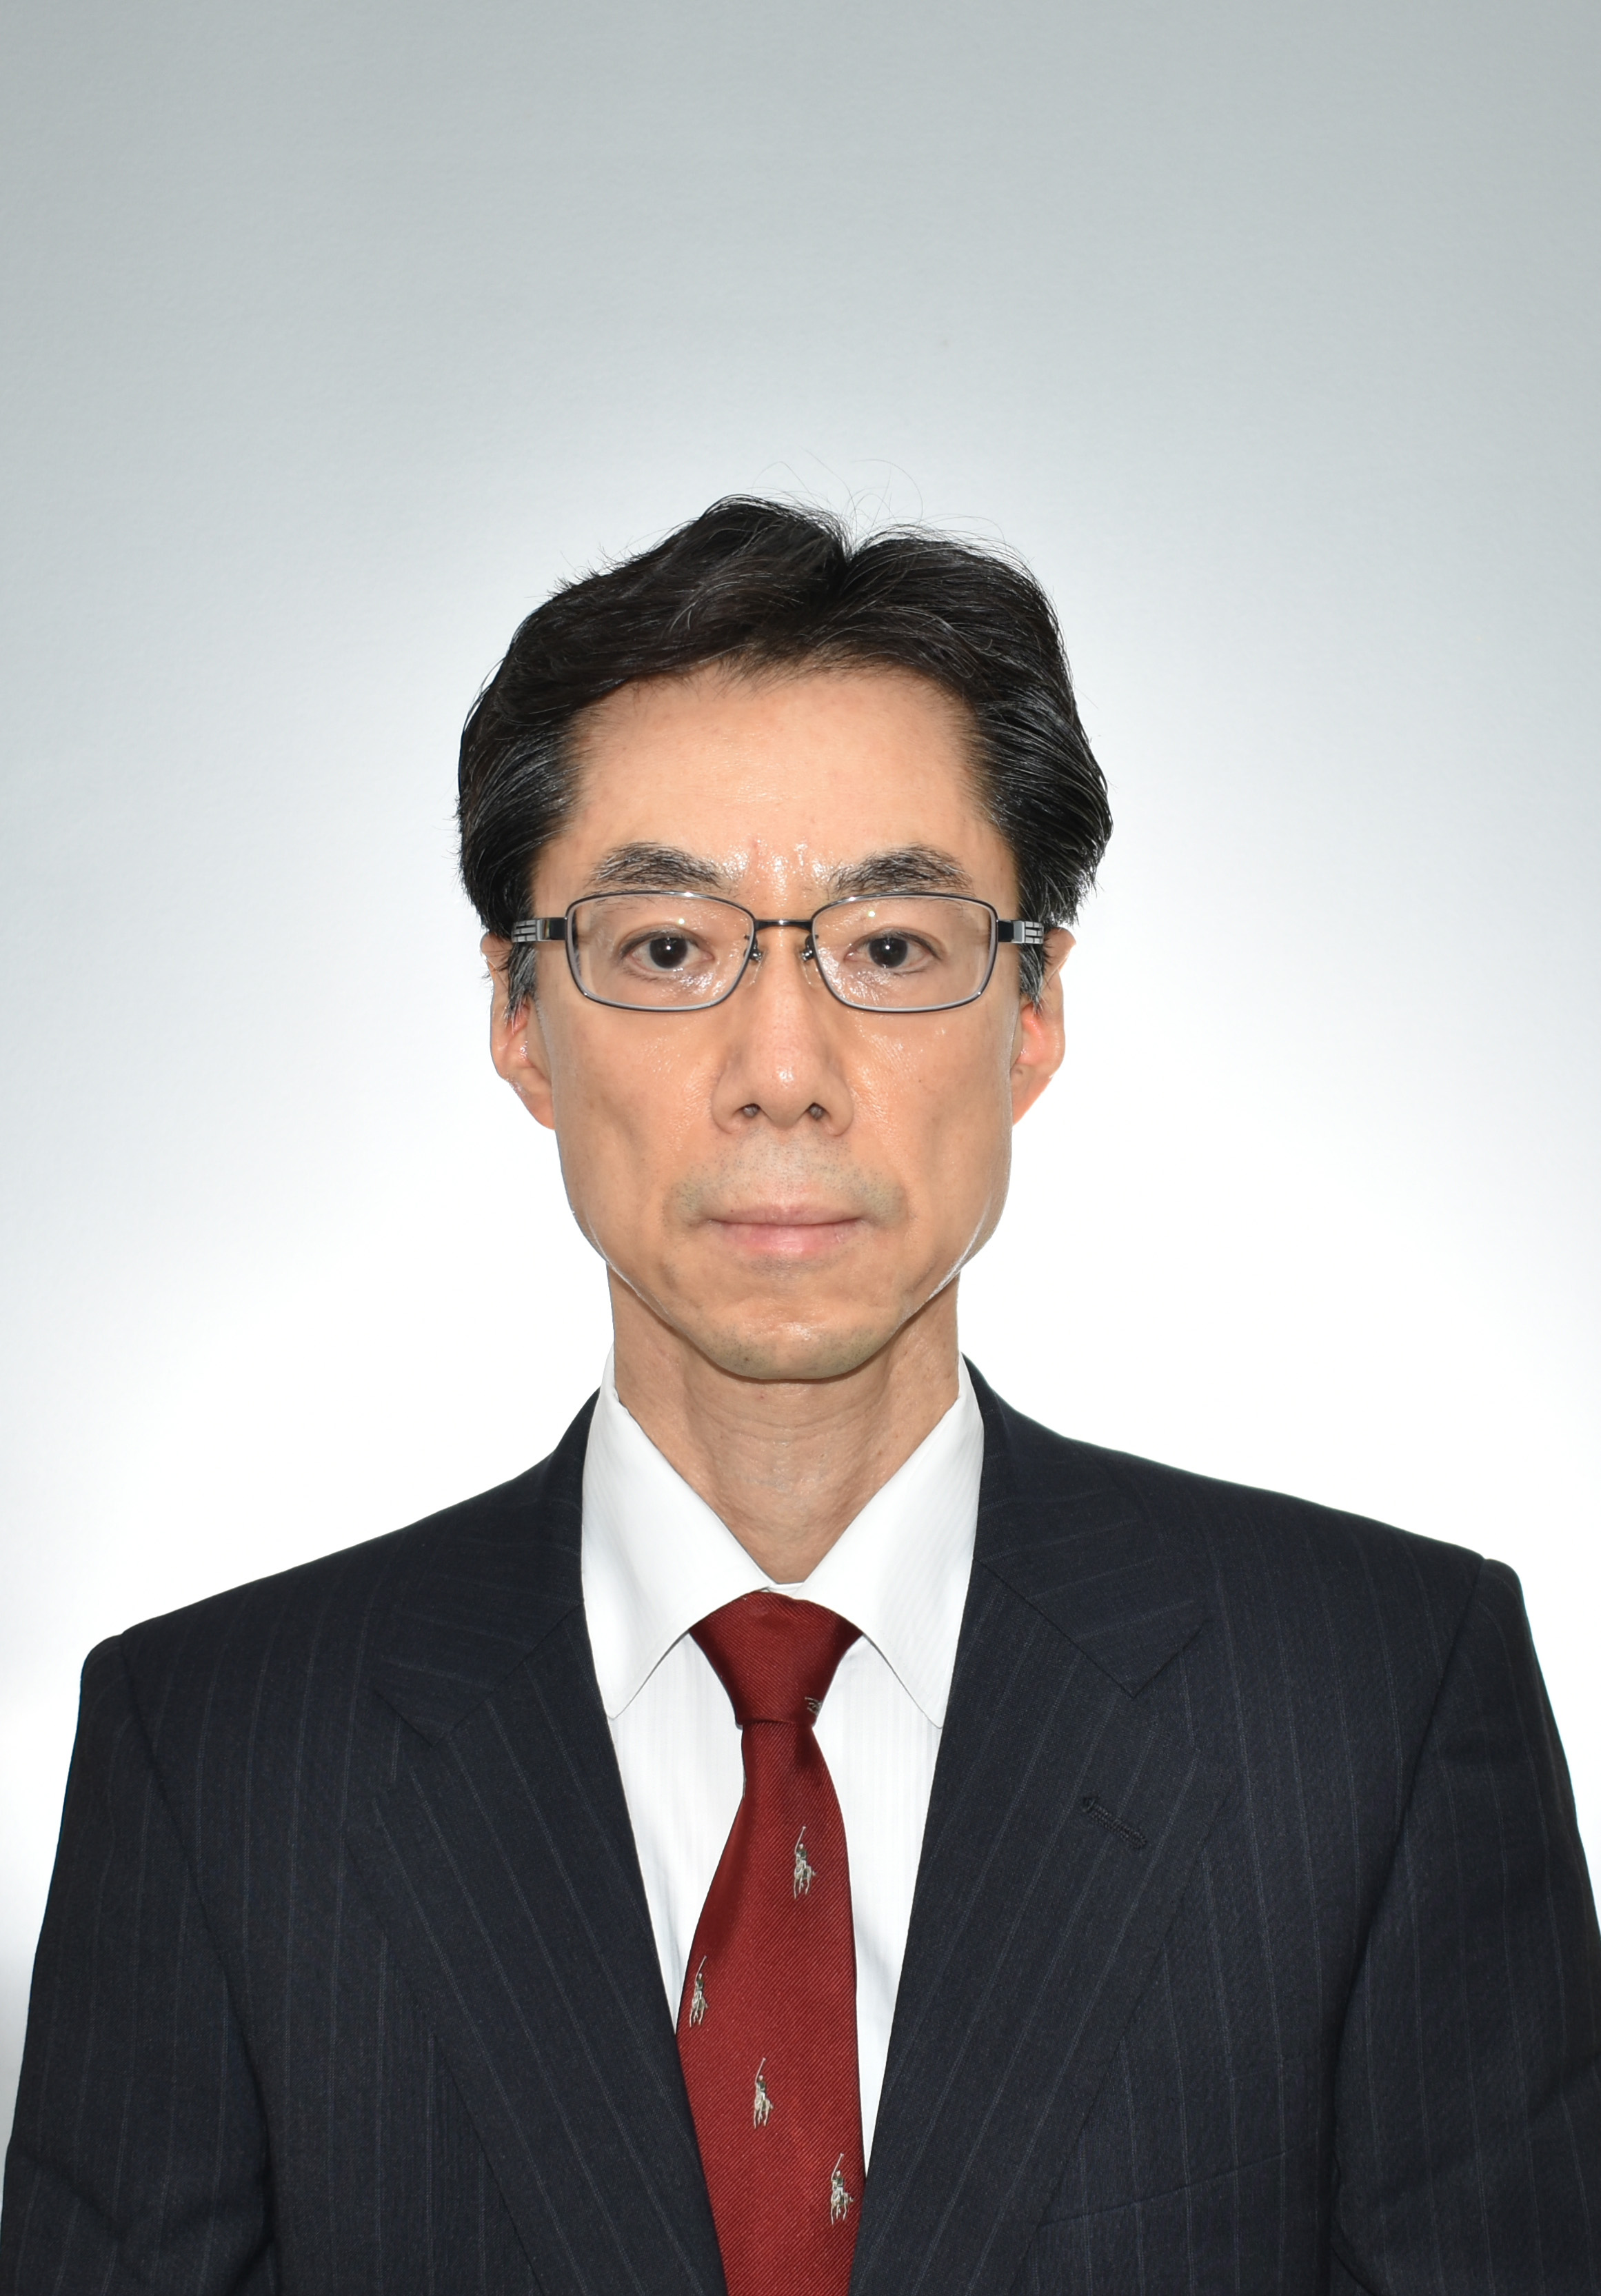 Topics: Professor Hirofumi Sakai won the Prizes for Science and Technology (Research Category) of the Commendation for Science and Technology by the Minister of Education, Culture, Sports, Science and Technology for 2023